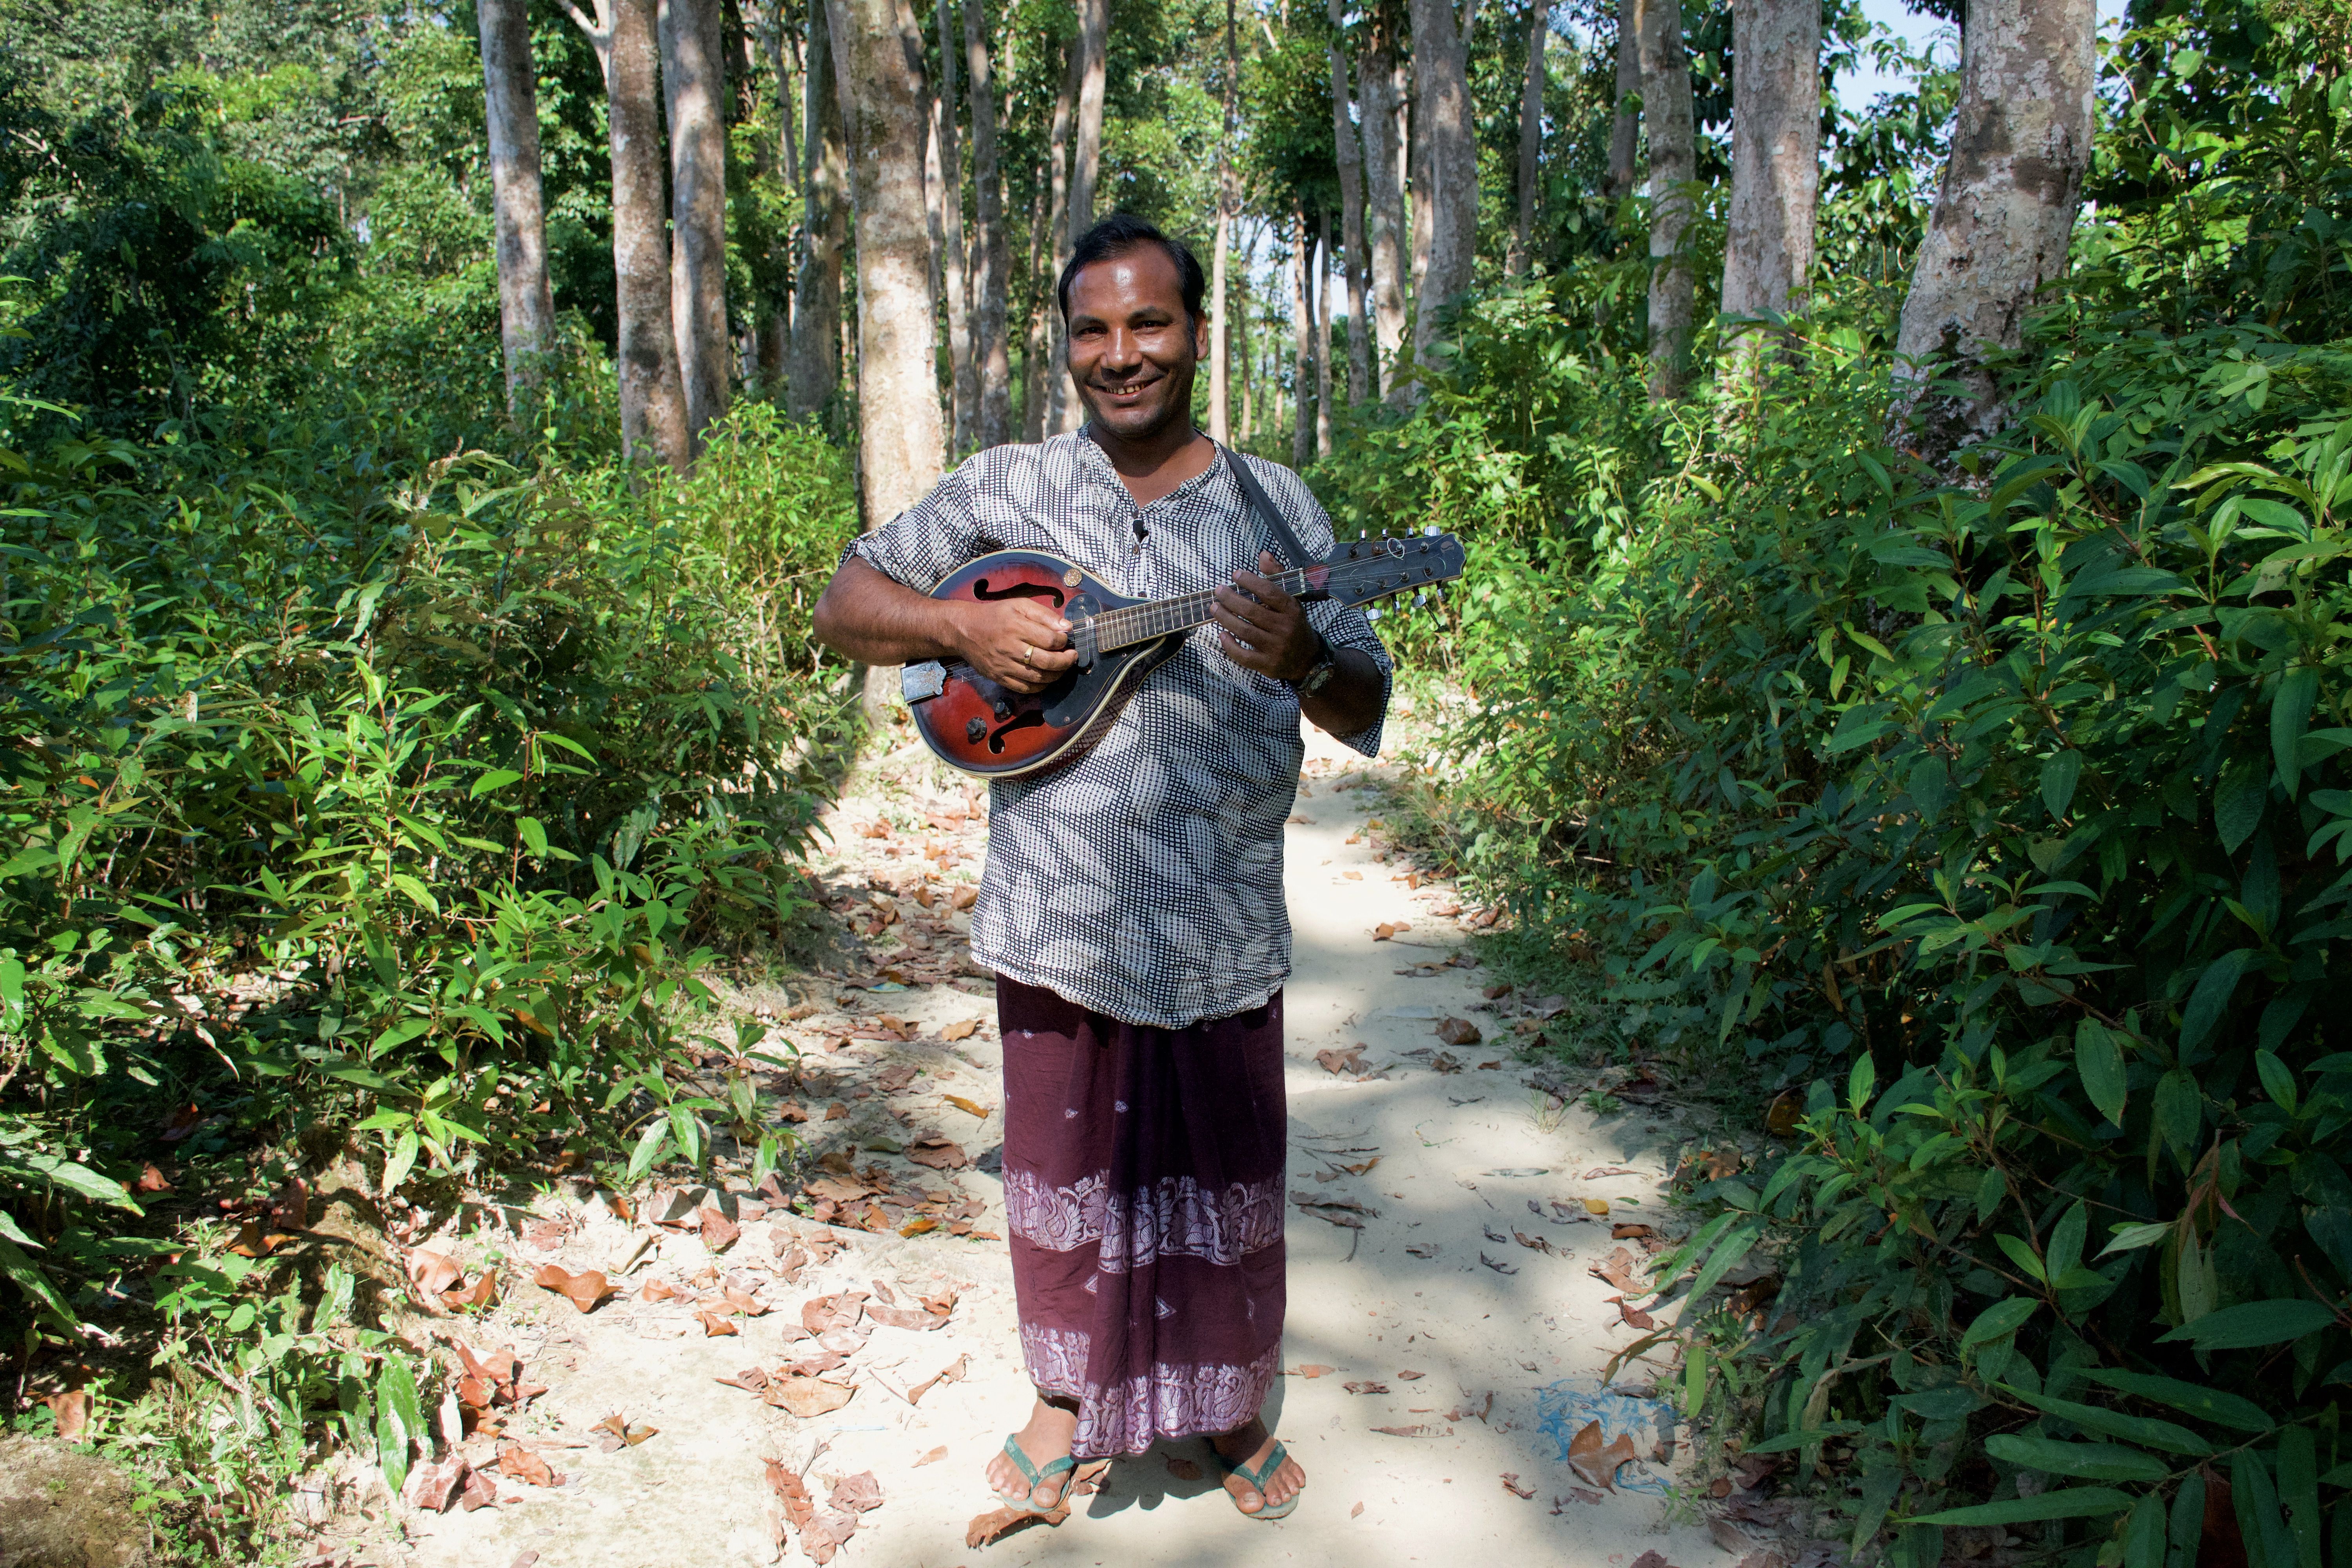 Soyedul Amin used to play music at weddings in Myanmar. He fled after being beaten and imprisoned. Image by Sasha Ingber. Bangladesh, 2019.